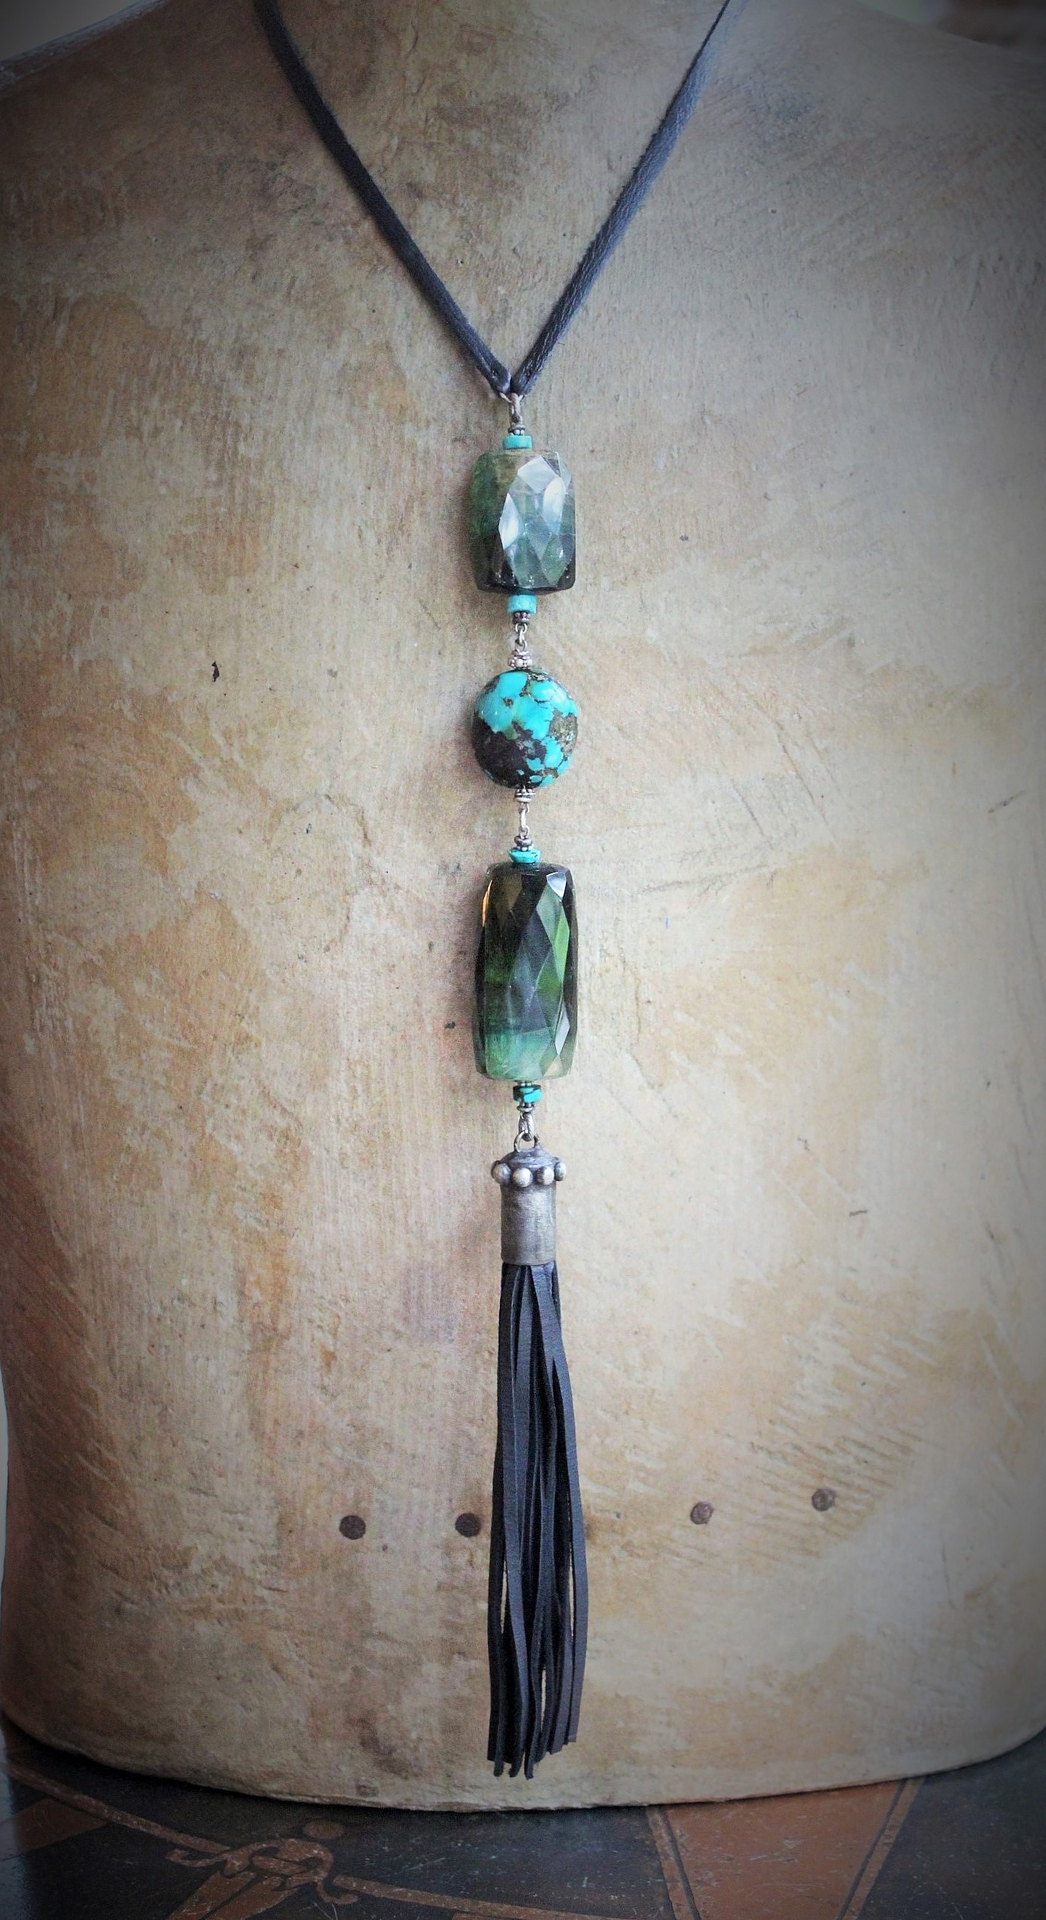 Joy & Happiness Necklace with Incredible Checkerboard Faceted Blue Green Tourmaline Gemstones,Polished Turquoise,Leather Tassel & Chain